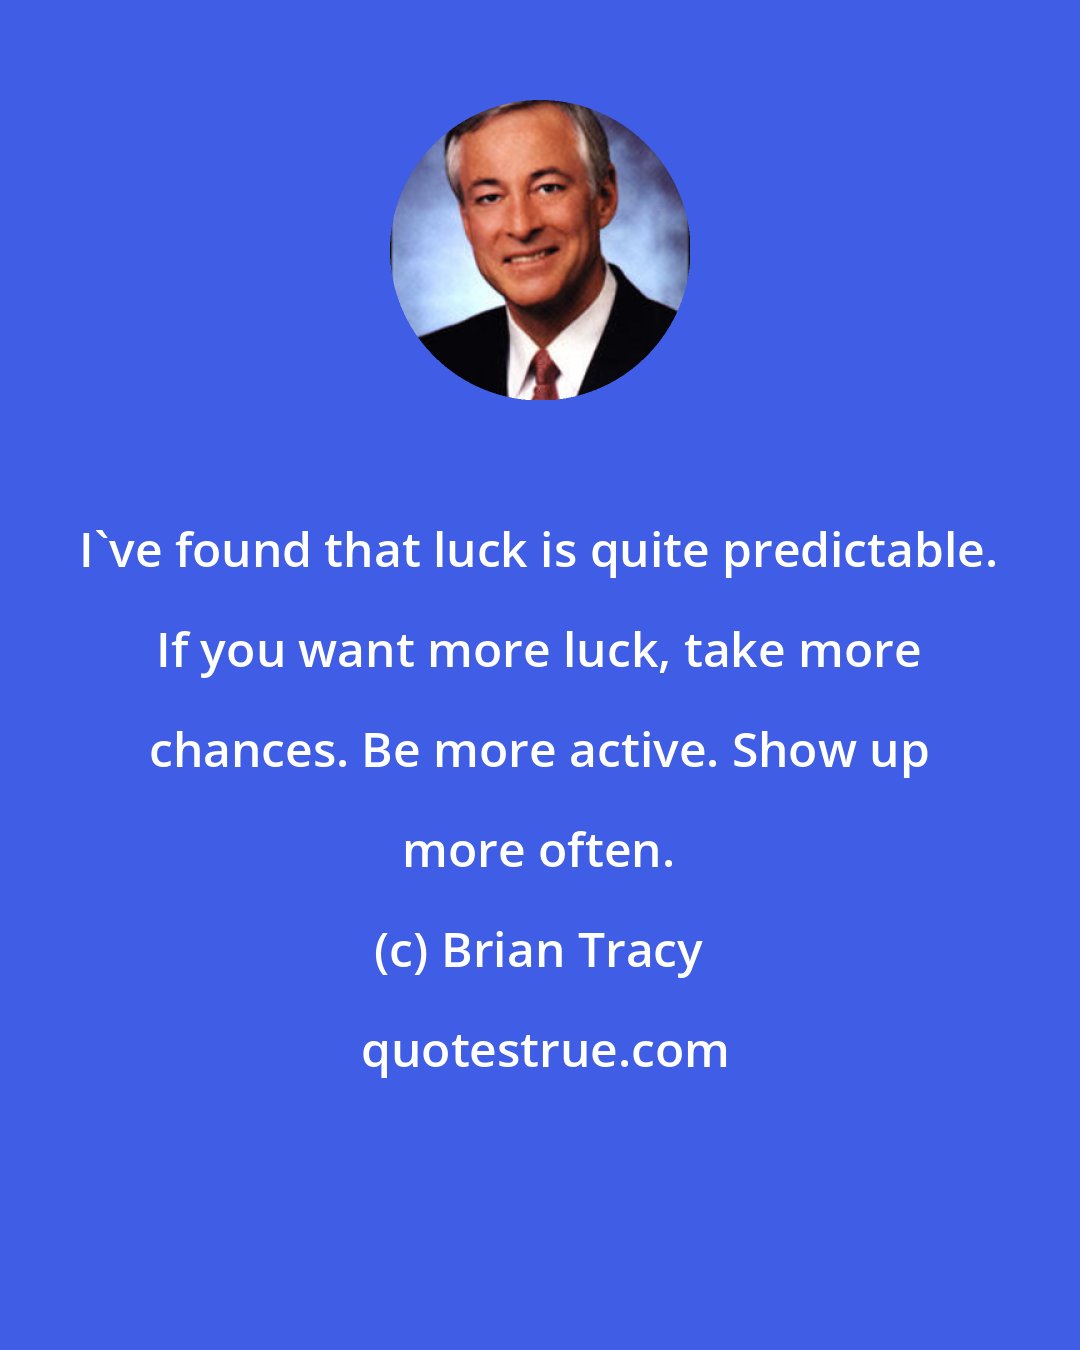 Brian Tracy: I've found that luck is quite predictable. If you want more luck, take more chances. Be more active. Show up more often.